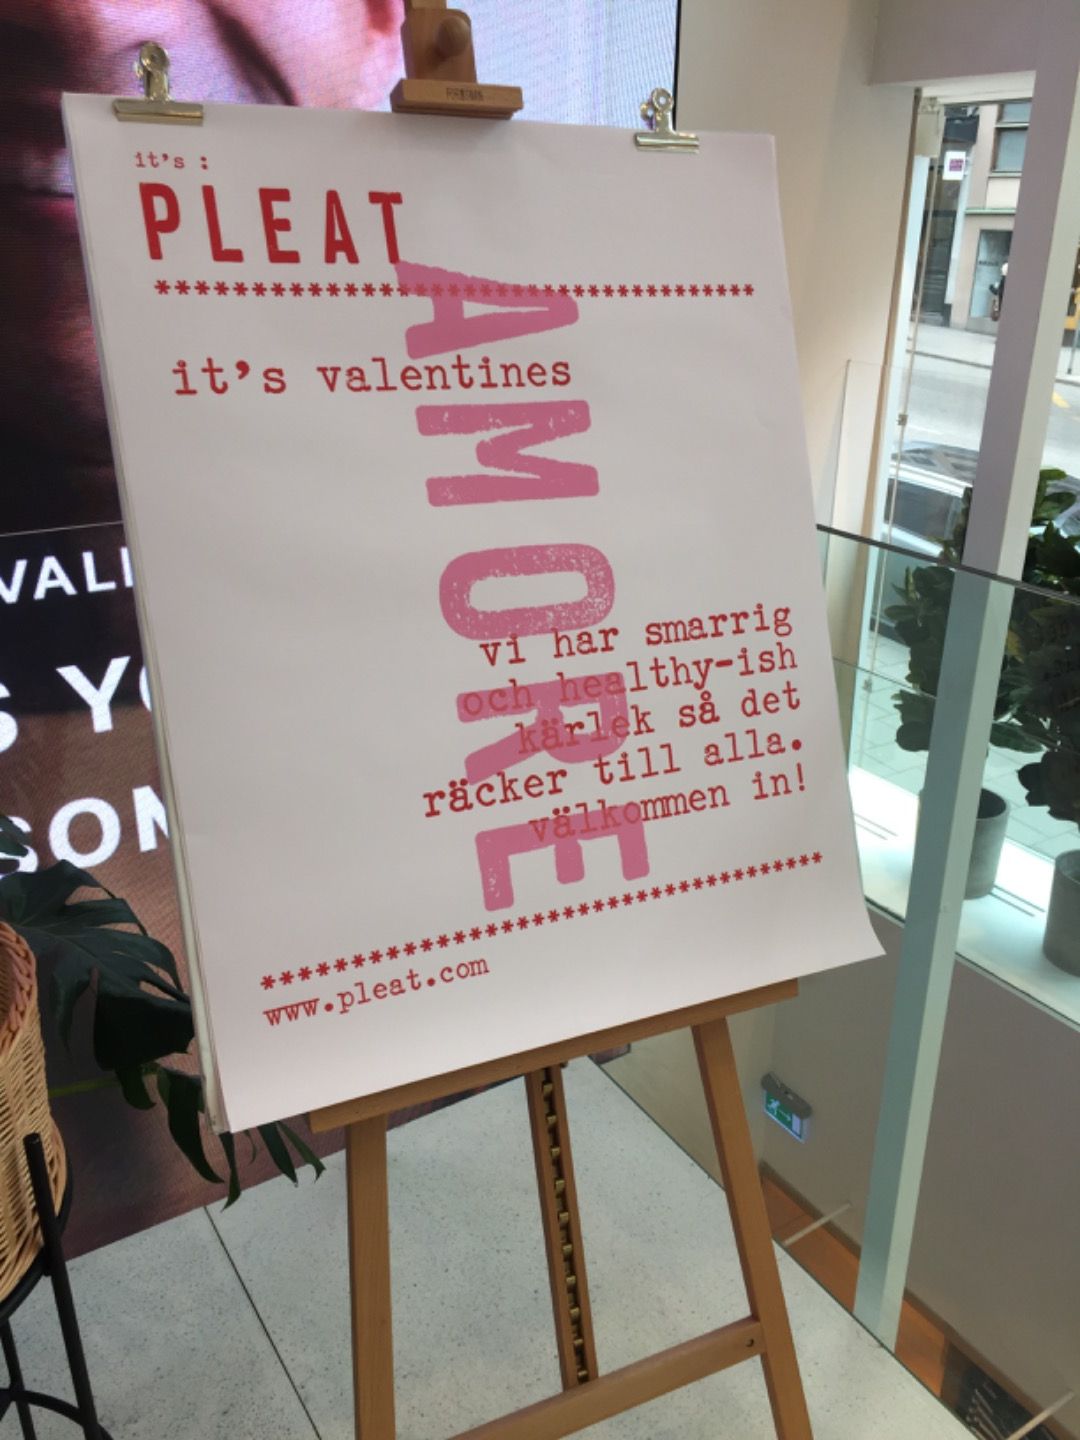 Photo from It's Pleat by Louise L. (12/01/2020)